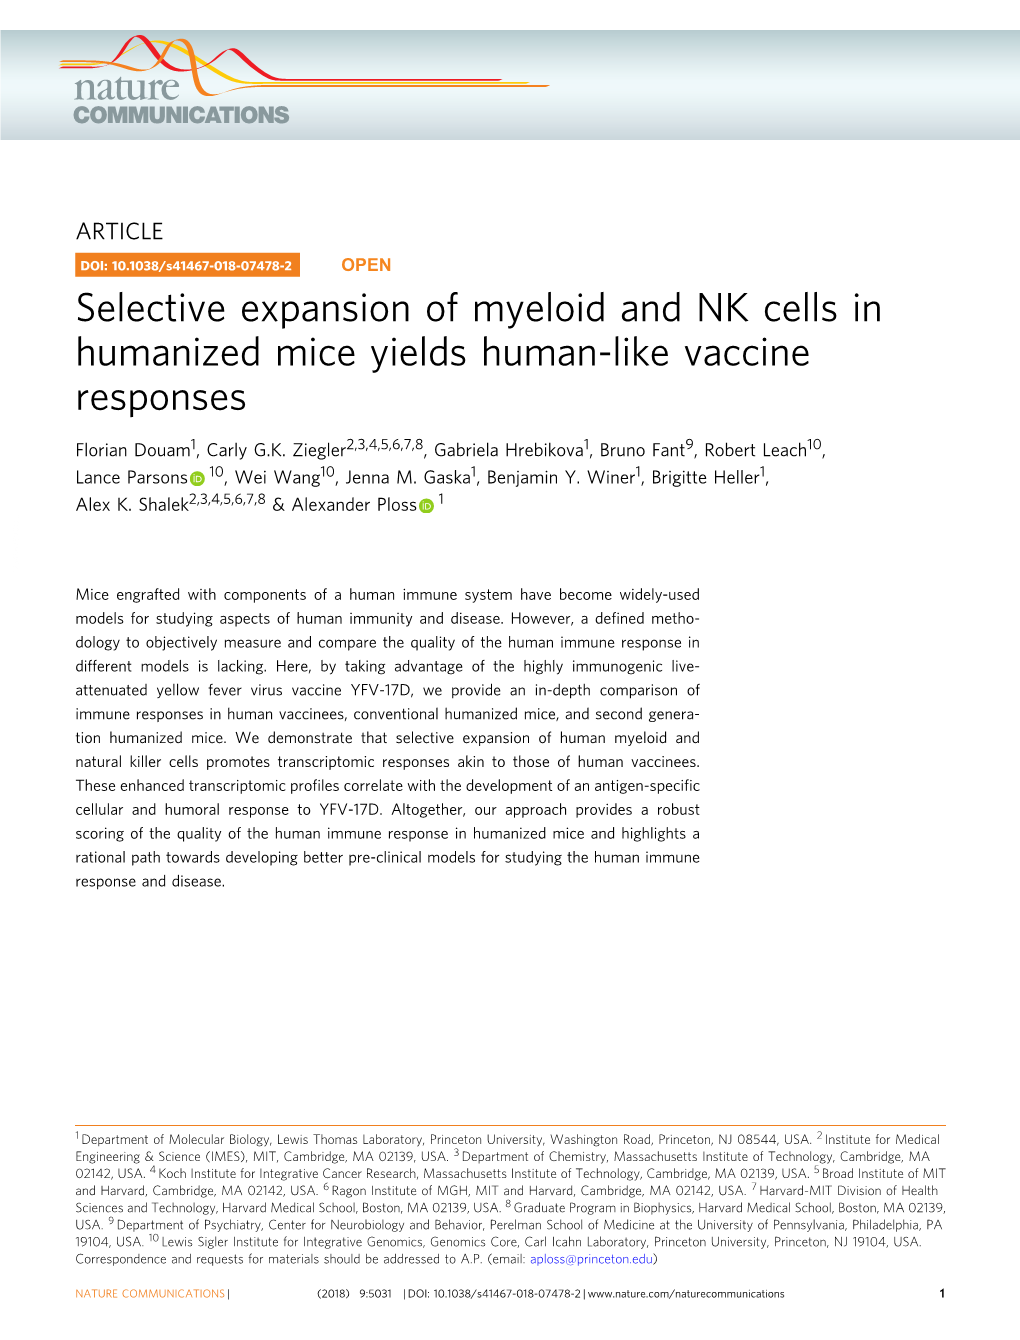 Selective Expansion of Myeloid and NK Cells in Humanized Mice Yields Human-Like Vaccine Responses